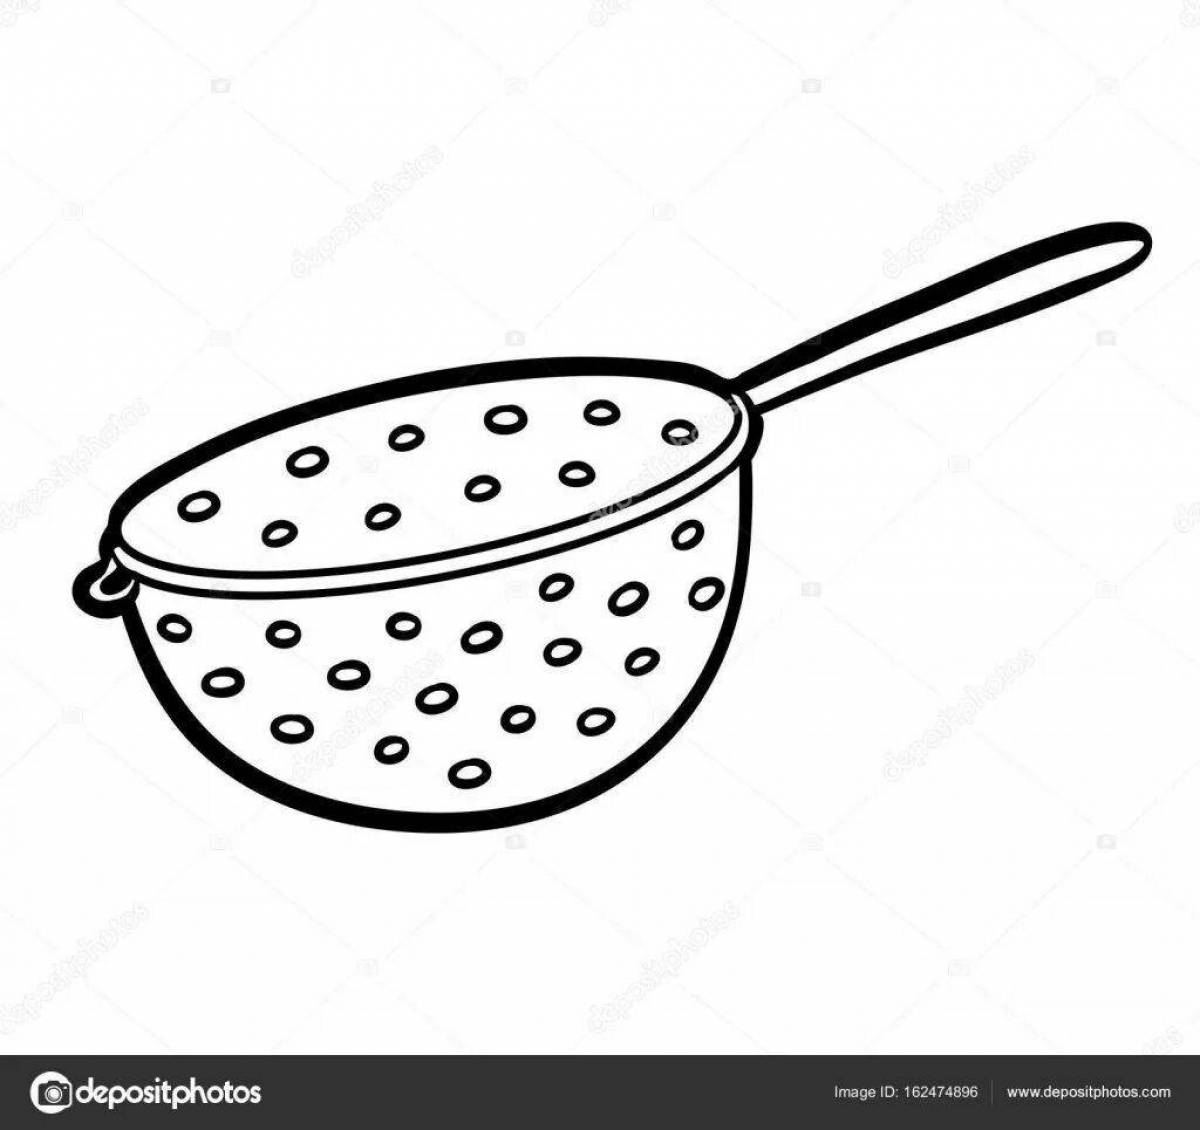 Exciting sieve coloring page